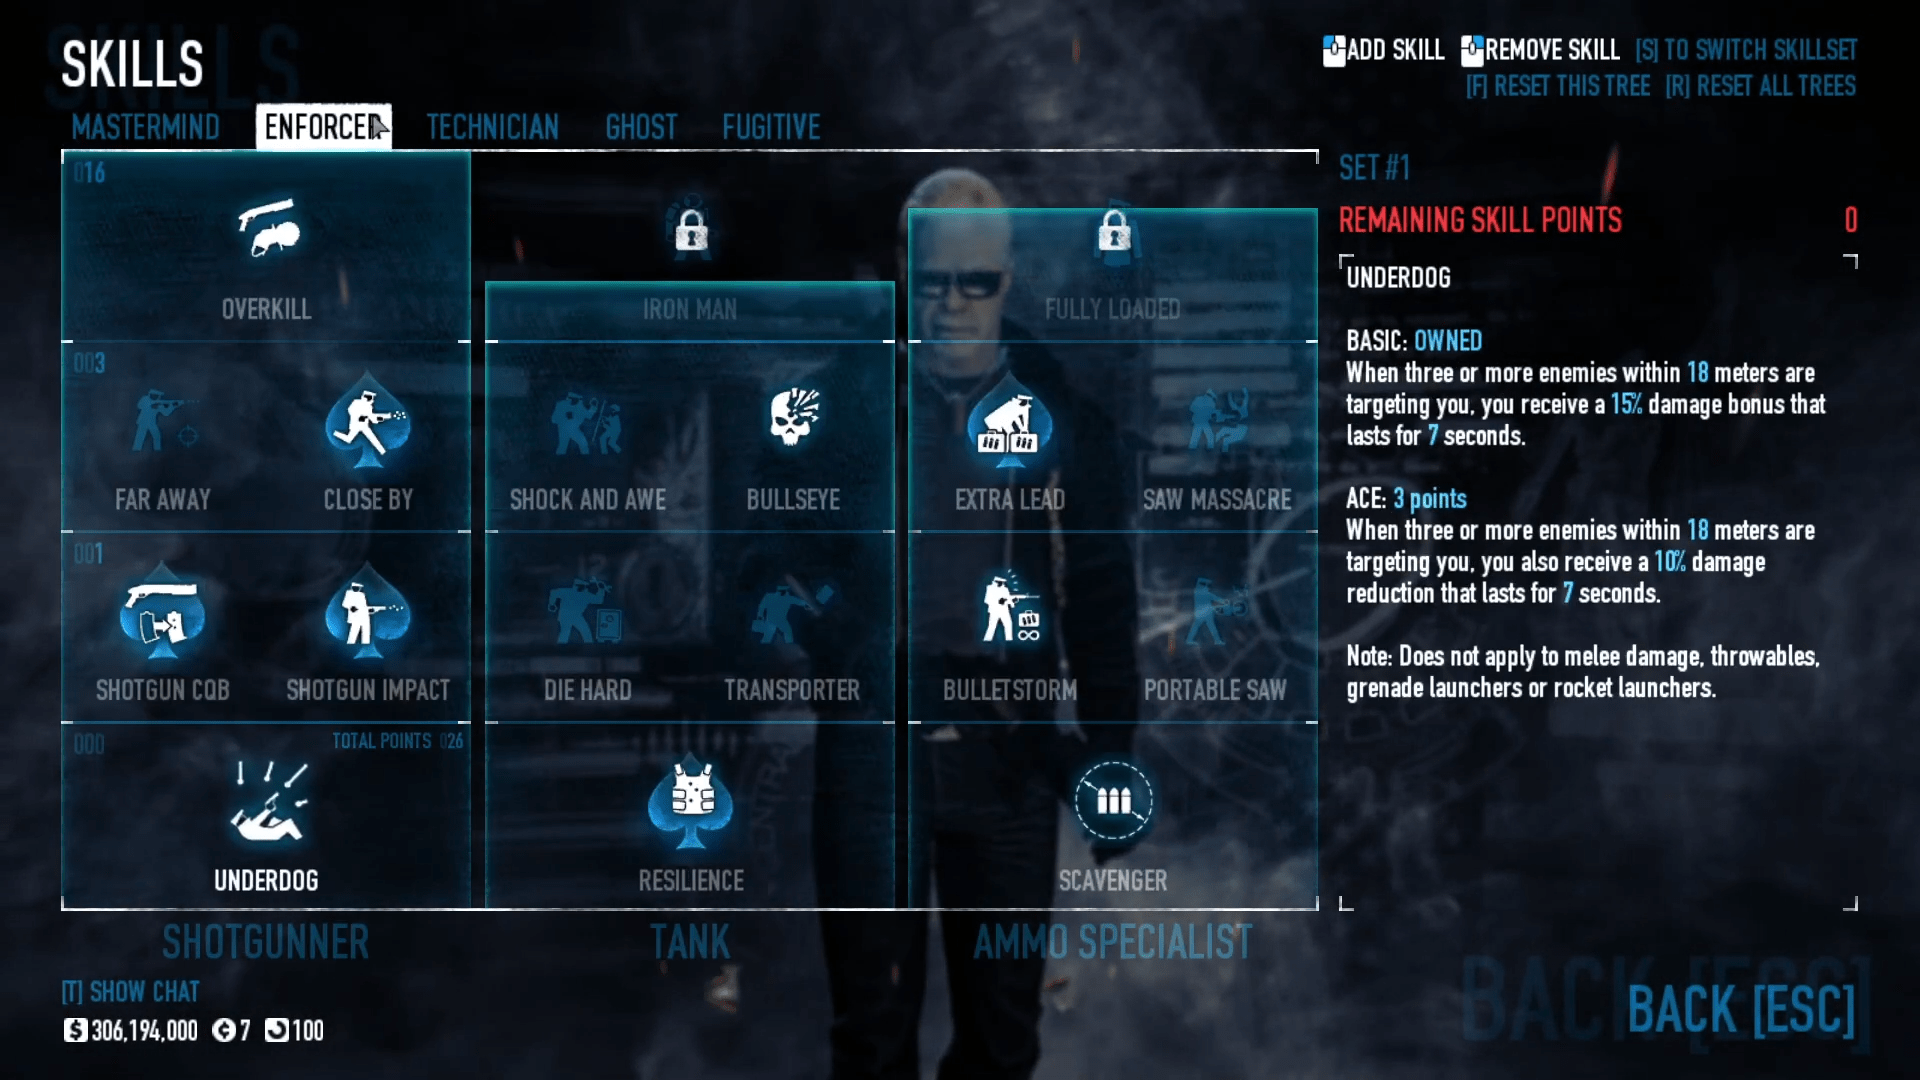 PAYDAY 2 - Best Build for Rogue with Breaker 12G - Rogue Build with Breaker 12G - DA5B61A